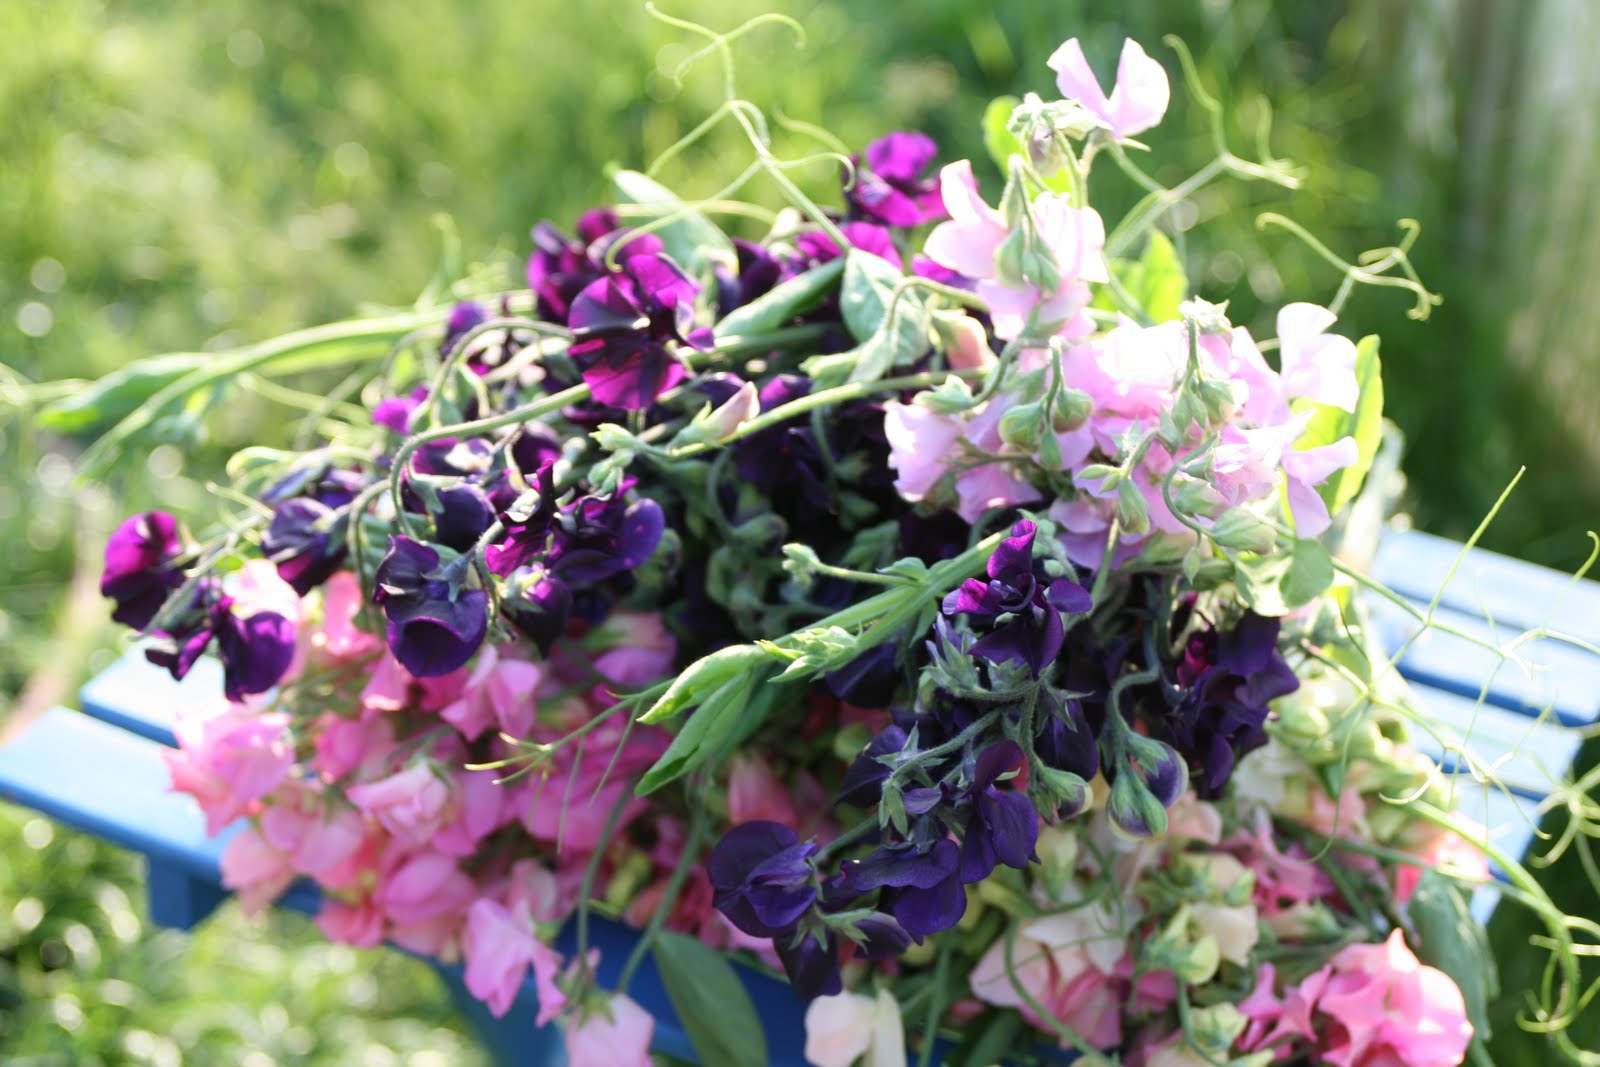 Sweet peas on outdoor table